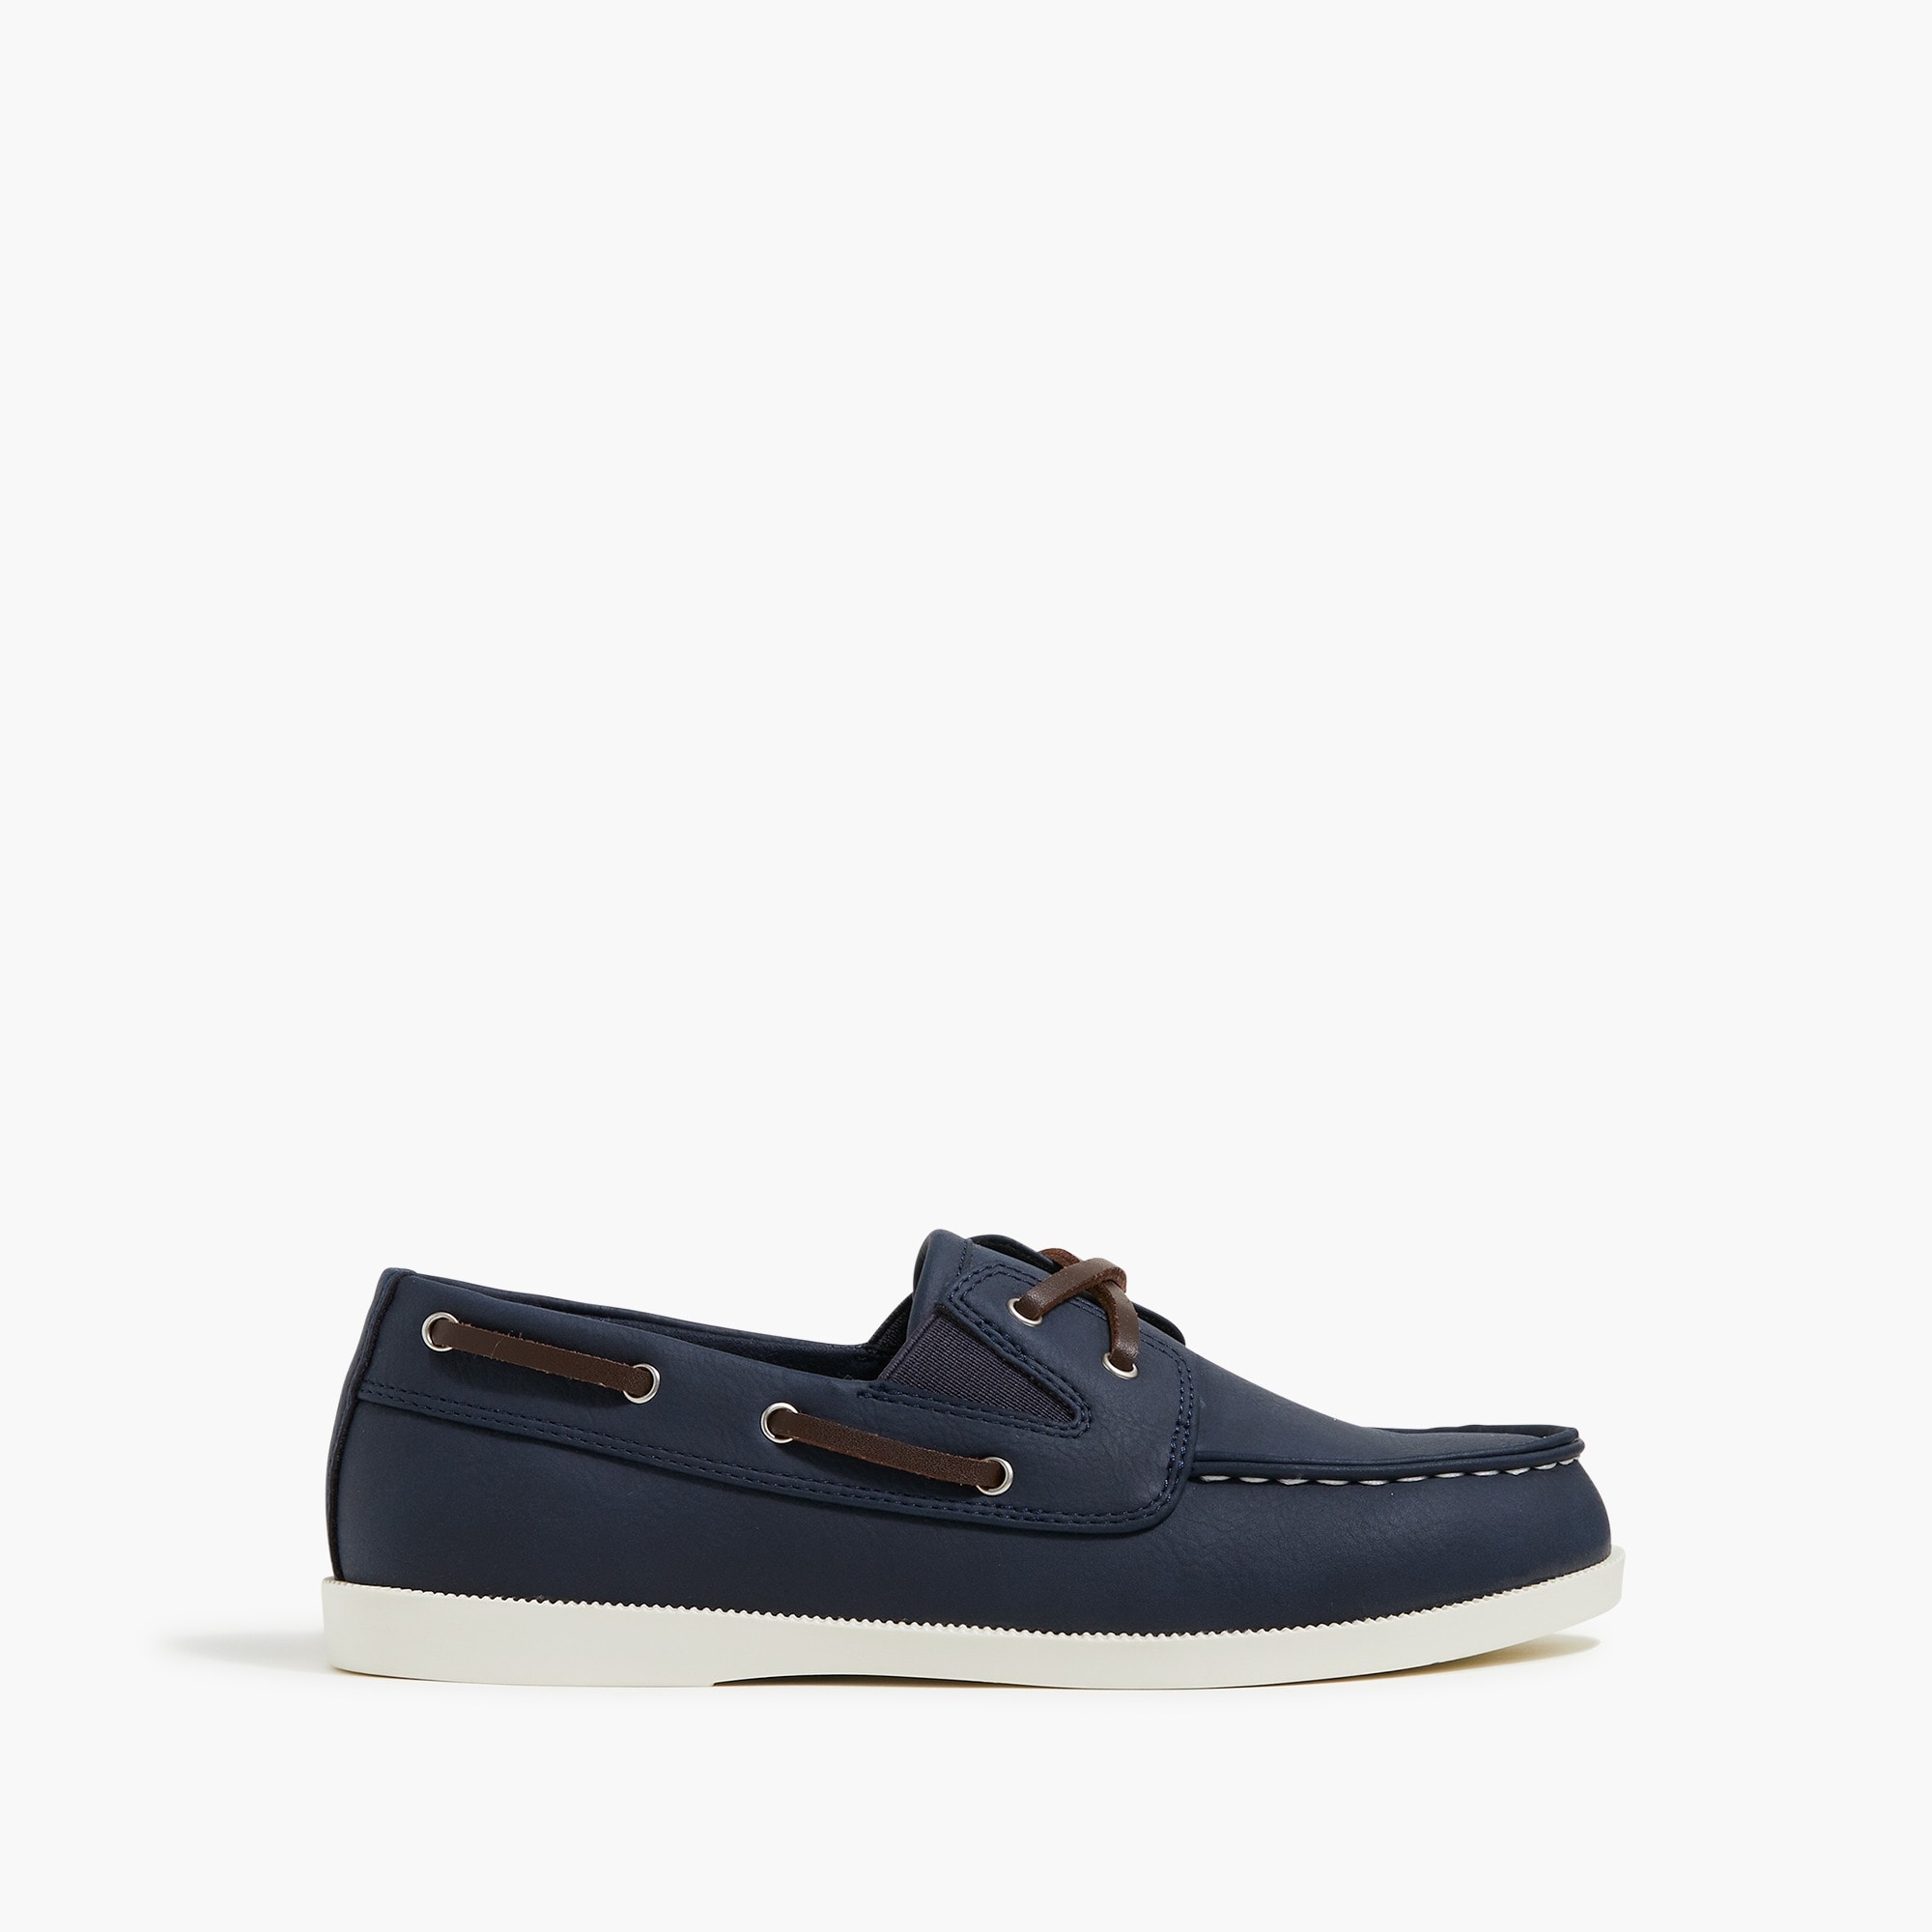 Kids' boat shoes